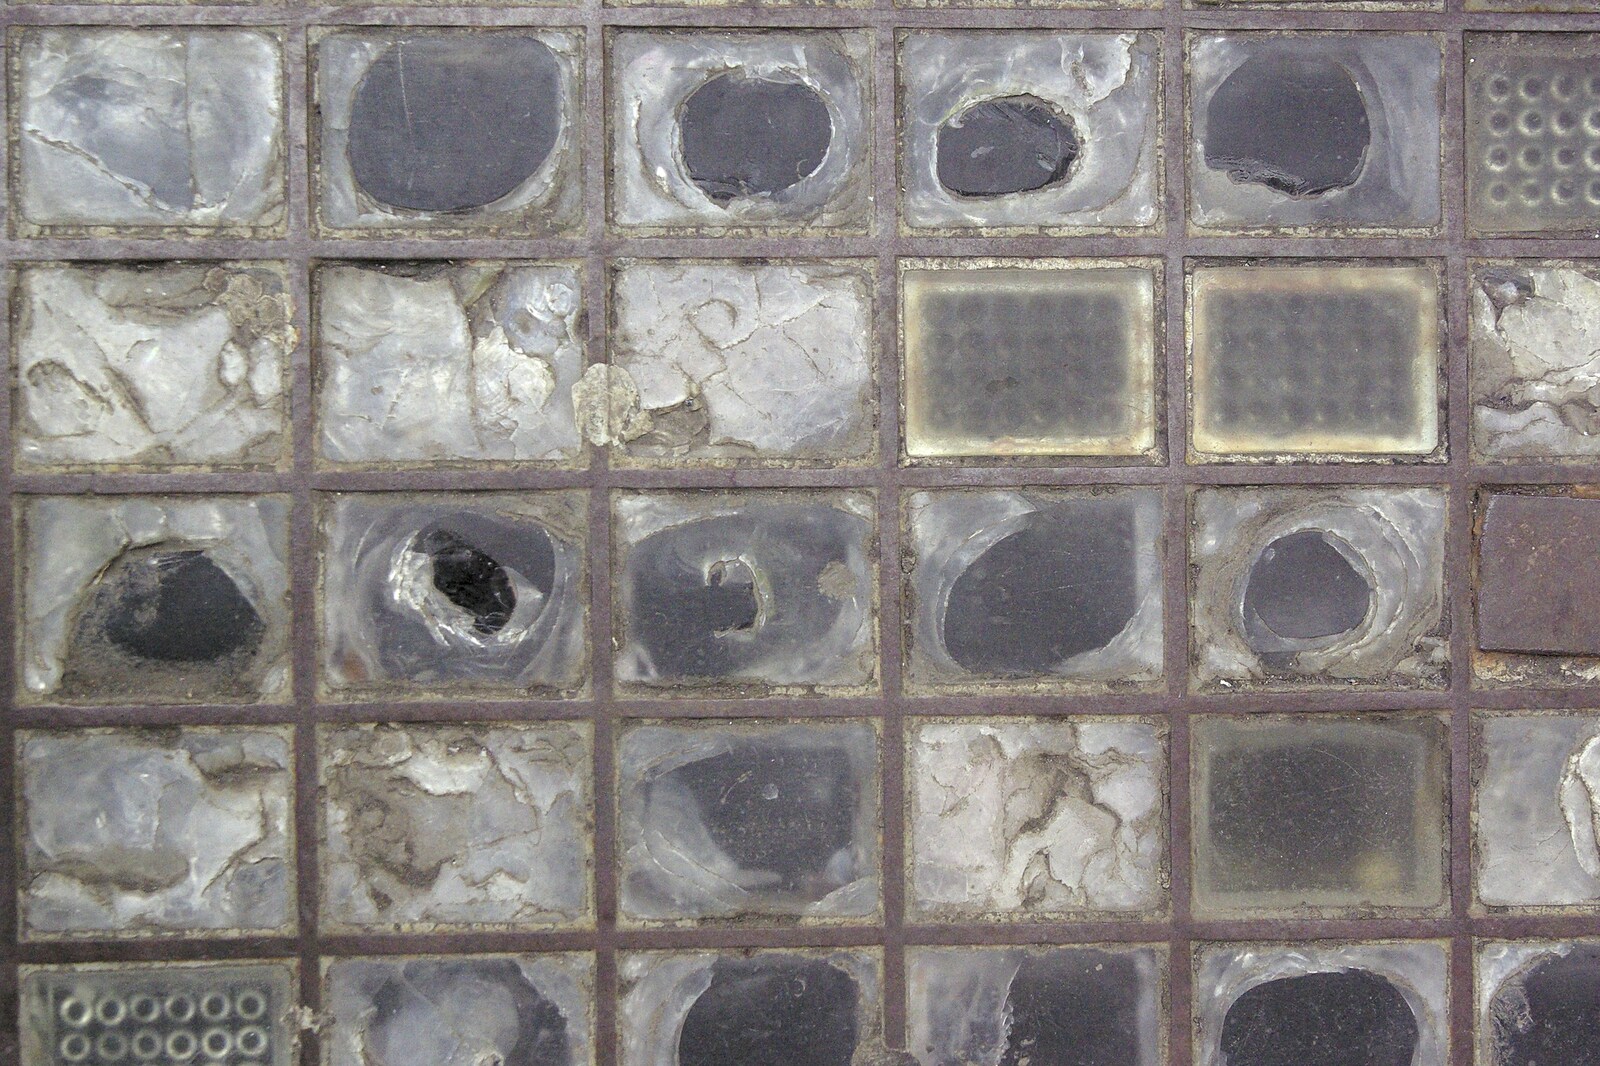 A glass grating on Grafton Street from Easter in Dublin, Ireland - 21st March 2008